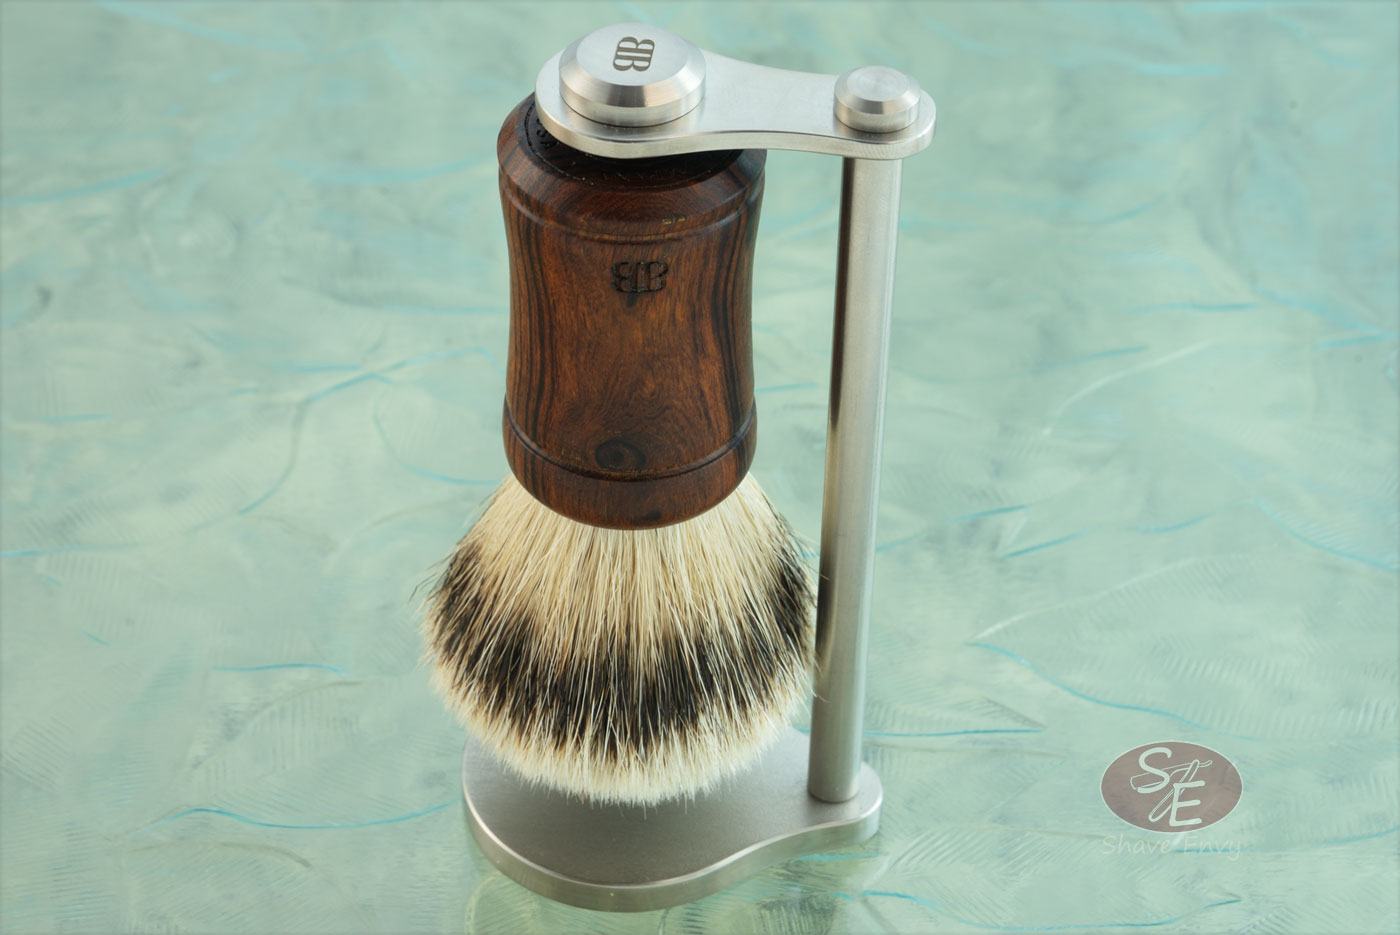 Silvertip Shaving Brush with Magnetic Stand - Ironwood (24mm Knot)